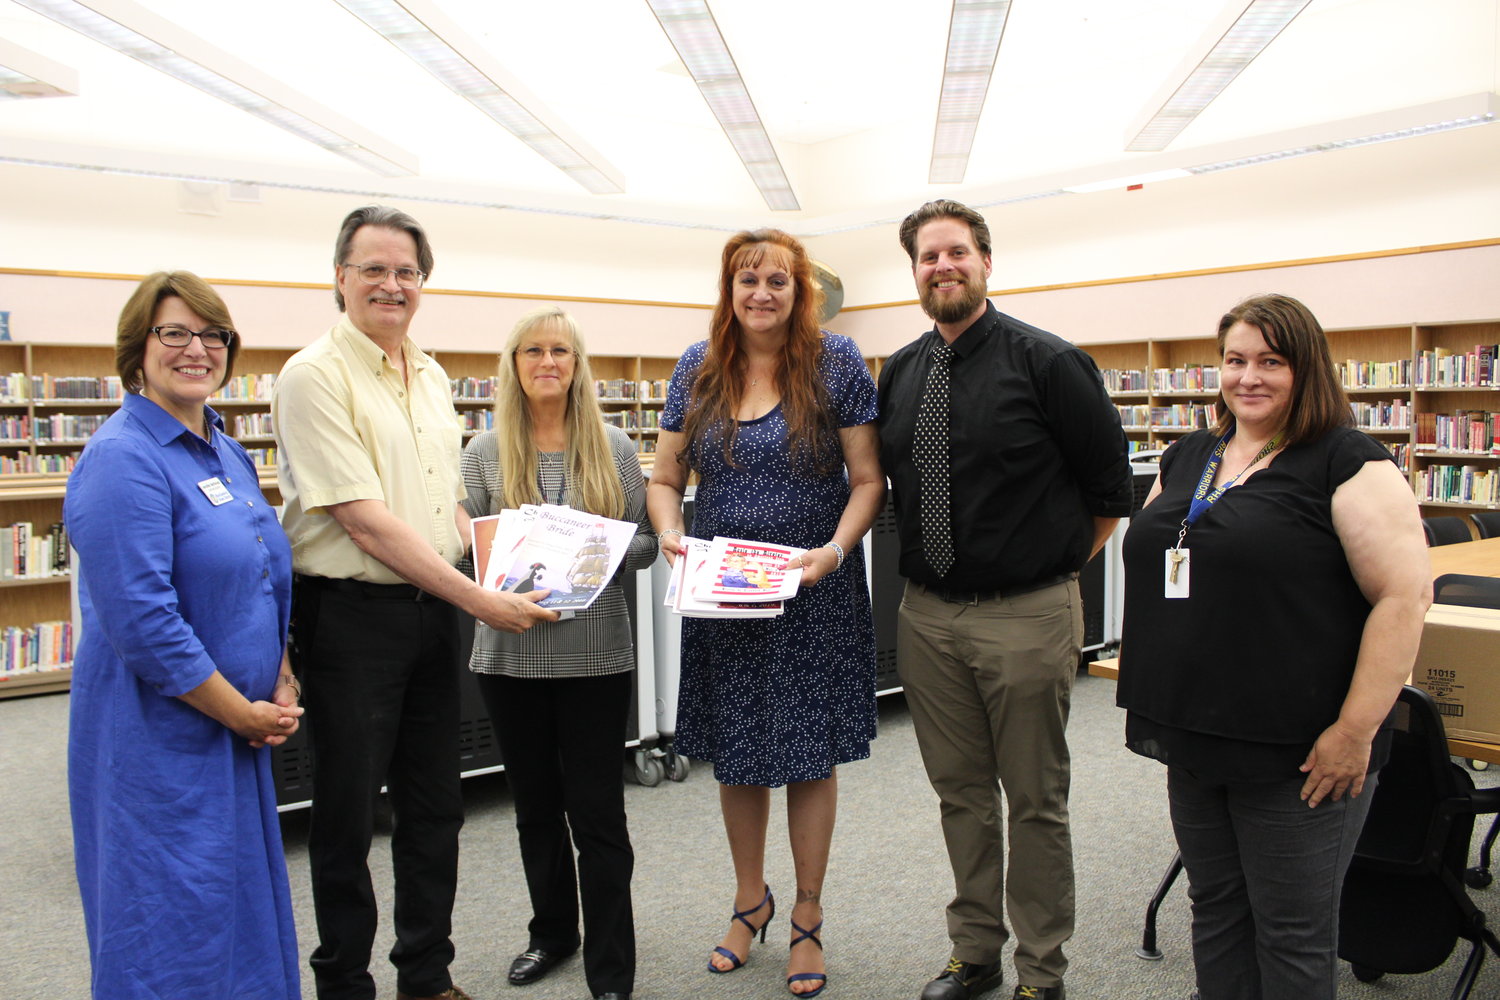 From left to right Rochester School District Superintendent Jennifer Bethman, Rochester High School theater teacher Doug West, RHS librarian Belinda Hollander, Elizabeth West, RHS Principal Michael Smith and RHS Vice Principal Heather Brooks in the RHS library. Doug and Elizabeth West presented the administrators with bound copies of original theater scripts written by Elizabeth West.